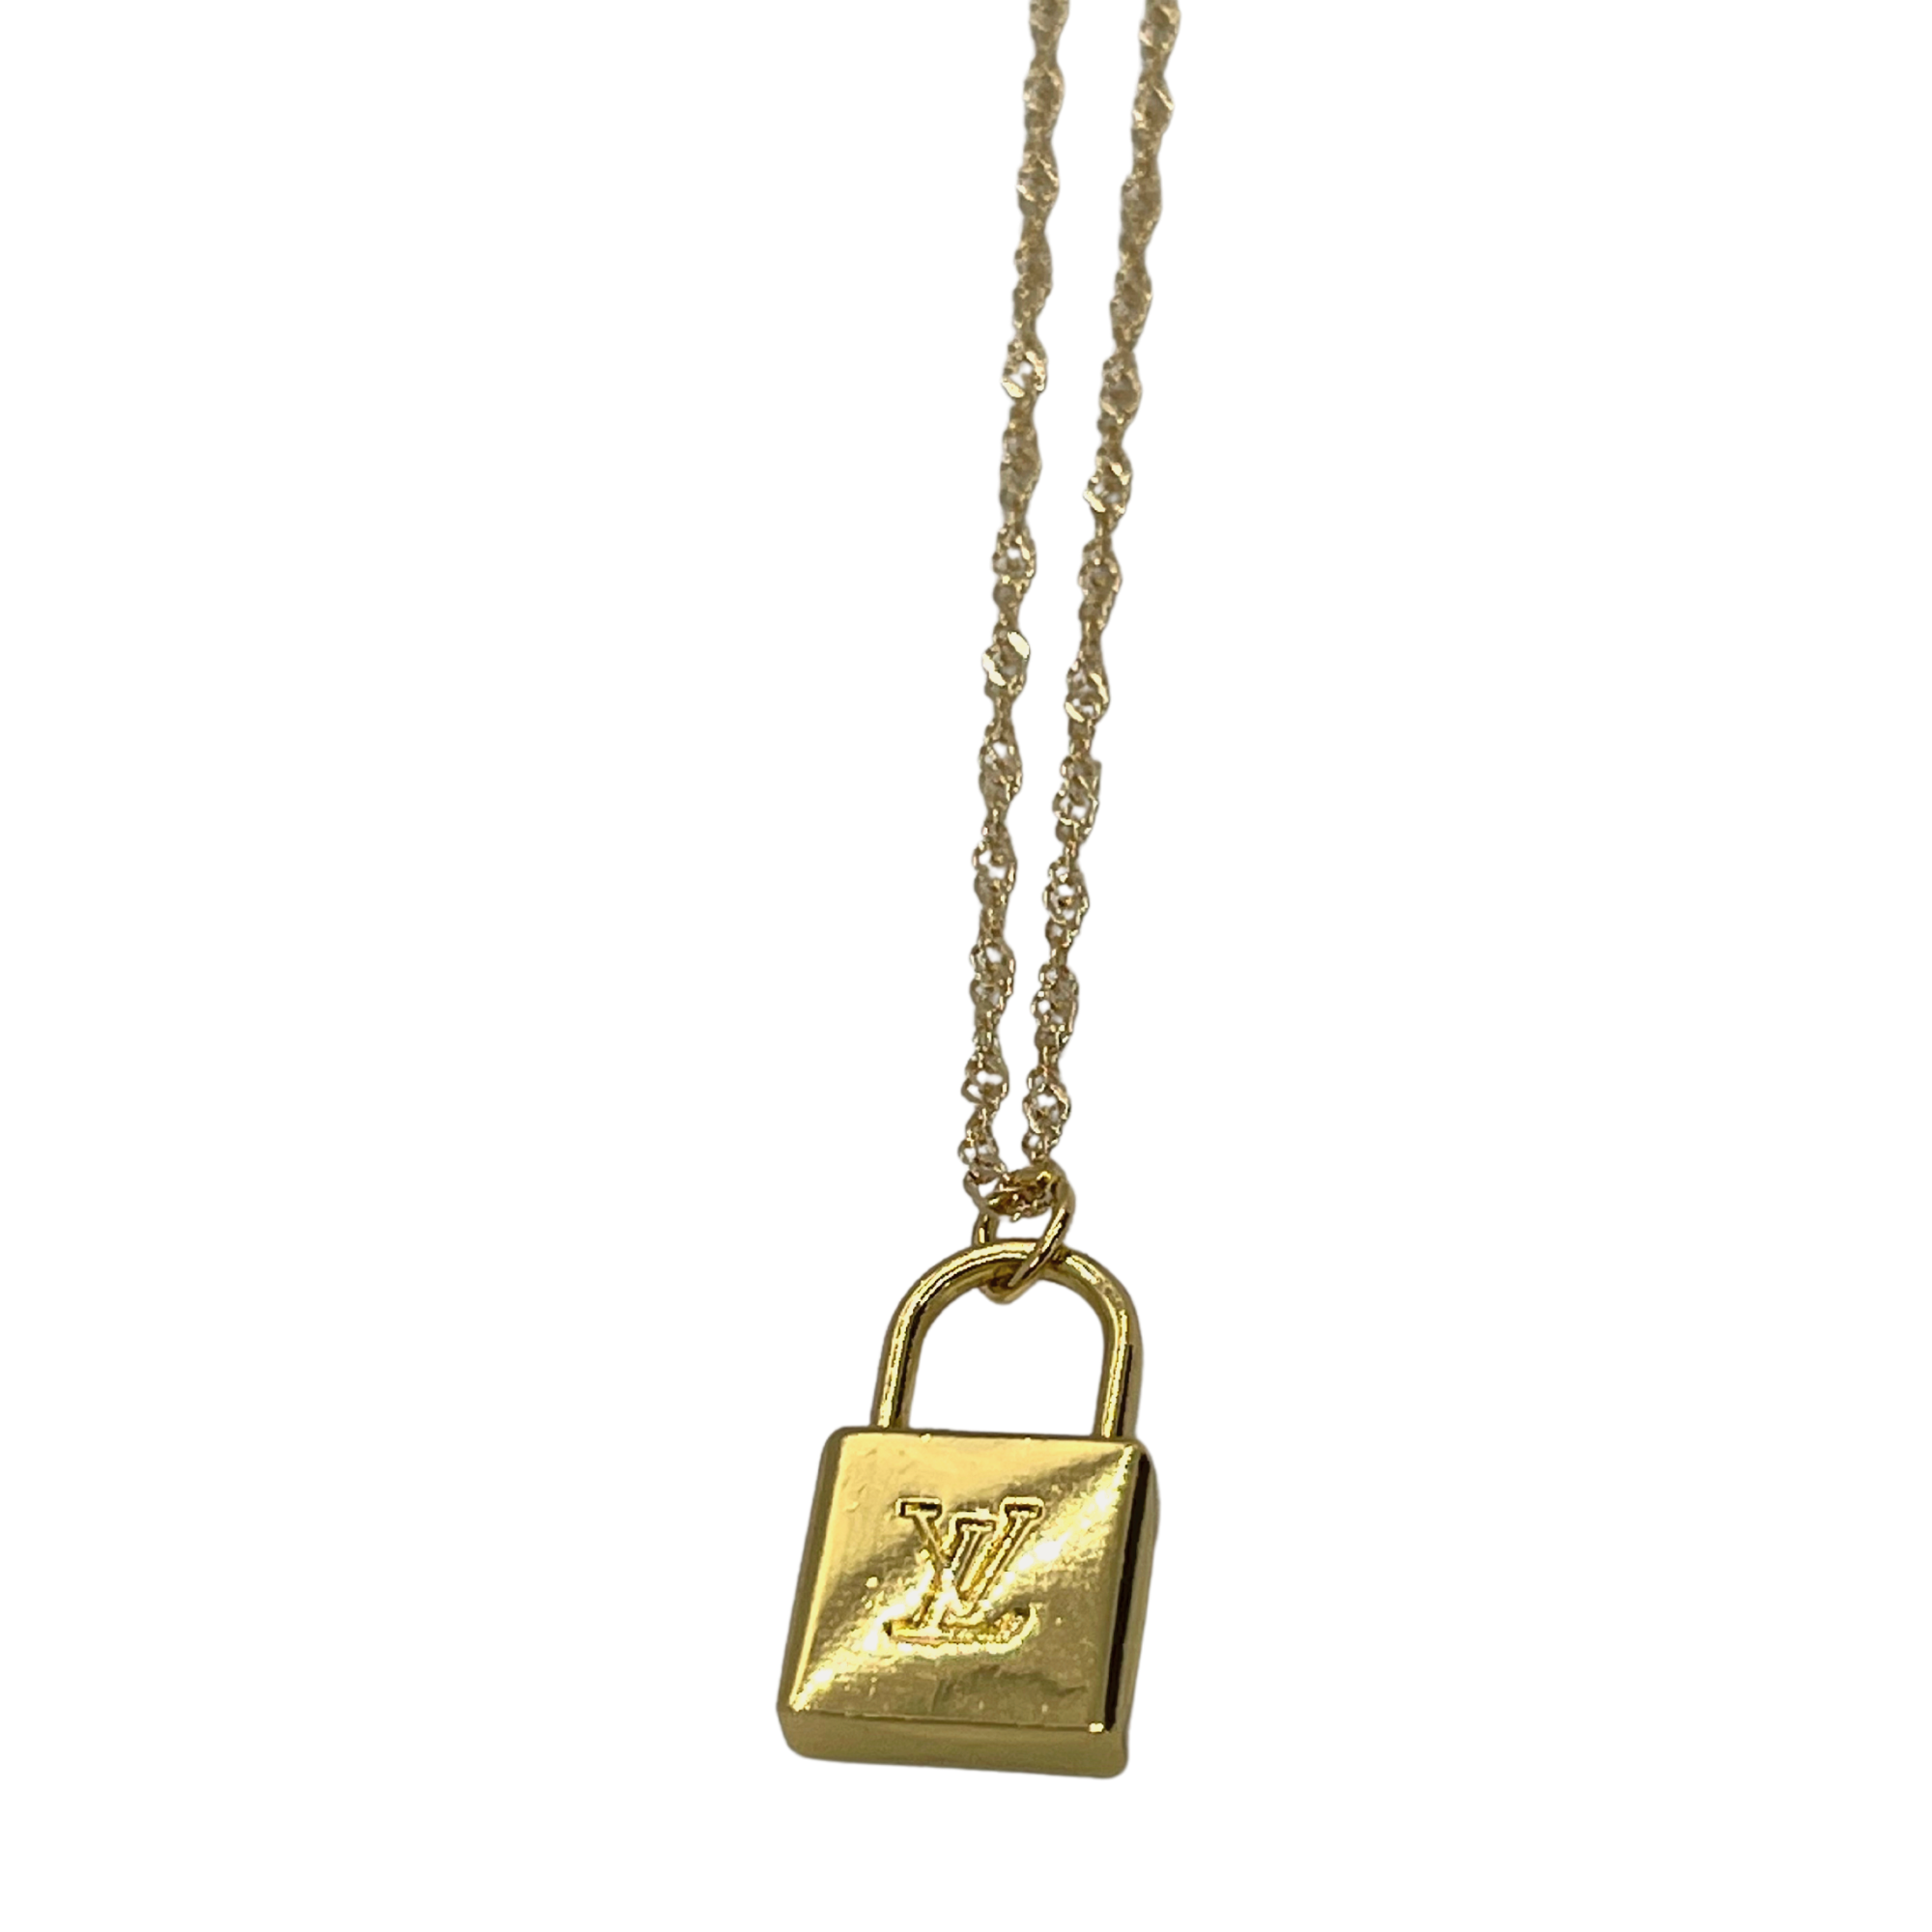 Designer Chain Necklace with Authentic Louis Vuitton Lock Attached  Relics  to Rhinestones